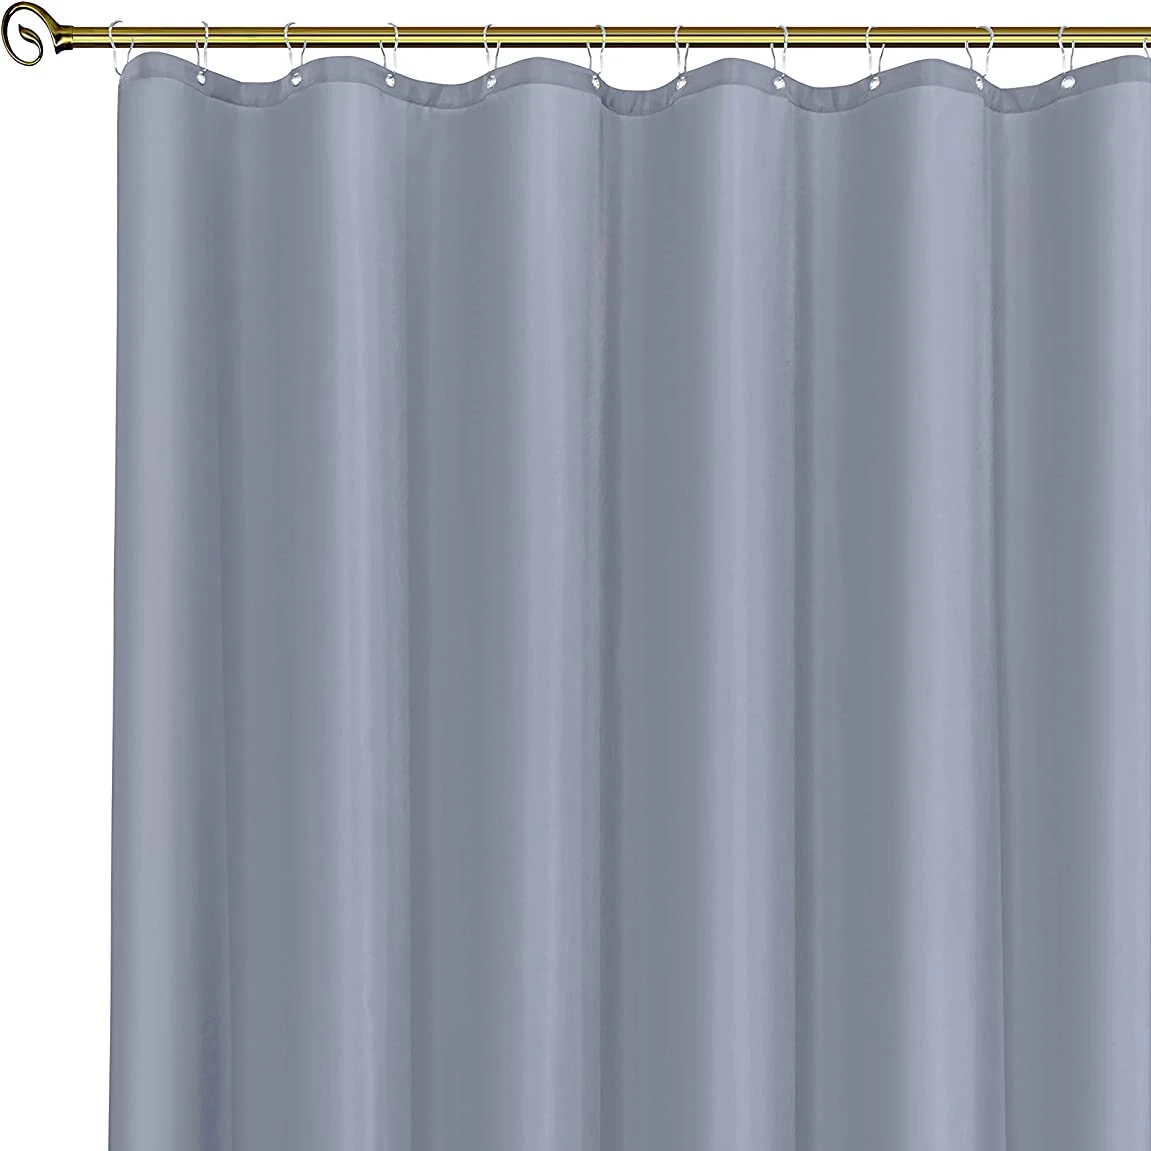 Hotel Quality Fabric Shower Curtain Liner 72 Inch by 72 Inch, customization color Water Resistant Bathroom Curtains Rust Resista